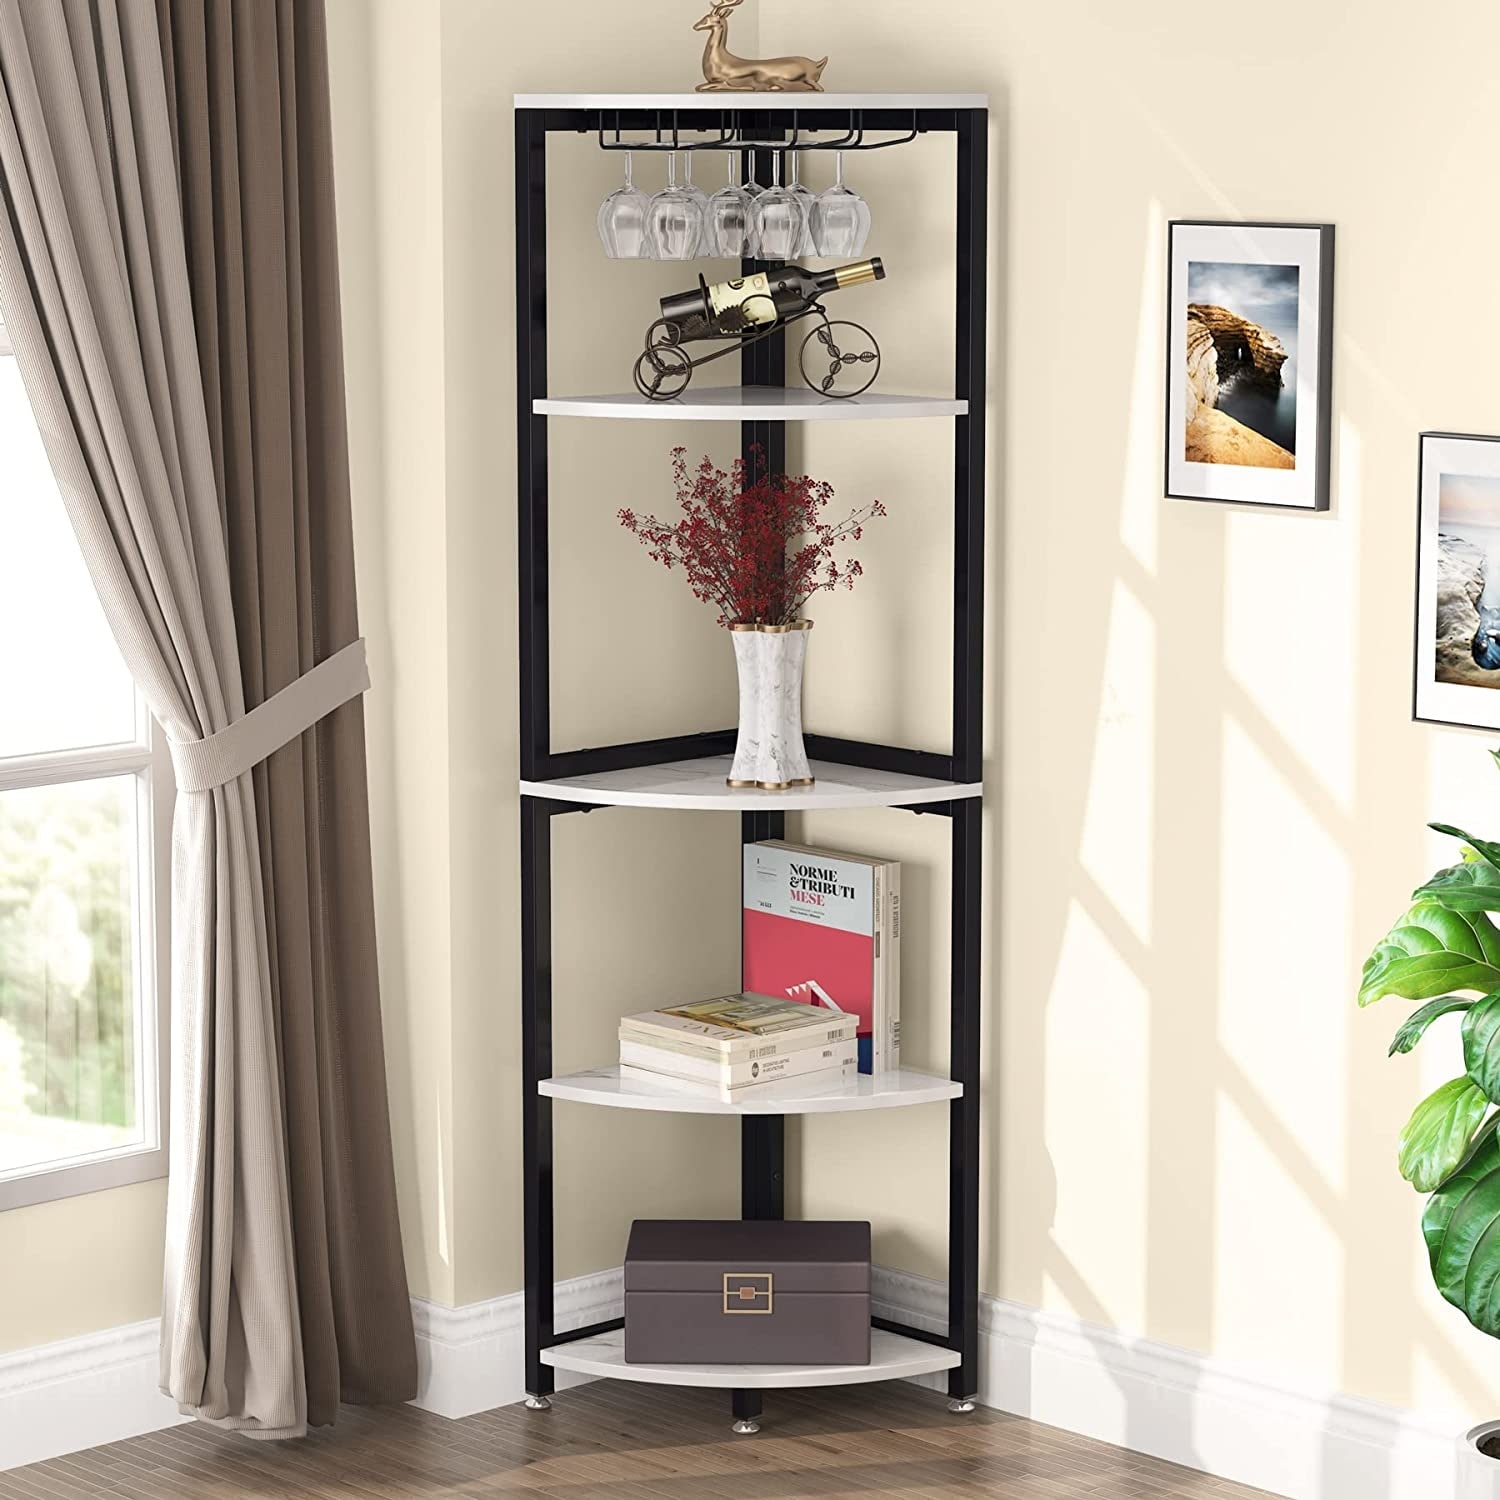 https://ak1.ostkcdn.com/images/products/is/images/direct/3df497d6dcc256b9a956dbebad4e973a5028bde6/5-Tier-Corner-Bookshelf-Small-Bookcase-Tall-Corner-Shelf-with-Wine-Glass-Holder-for-Living-Room.jpg